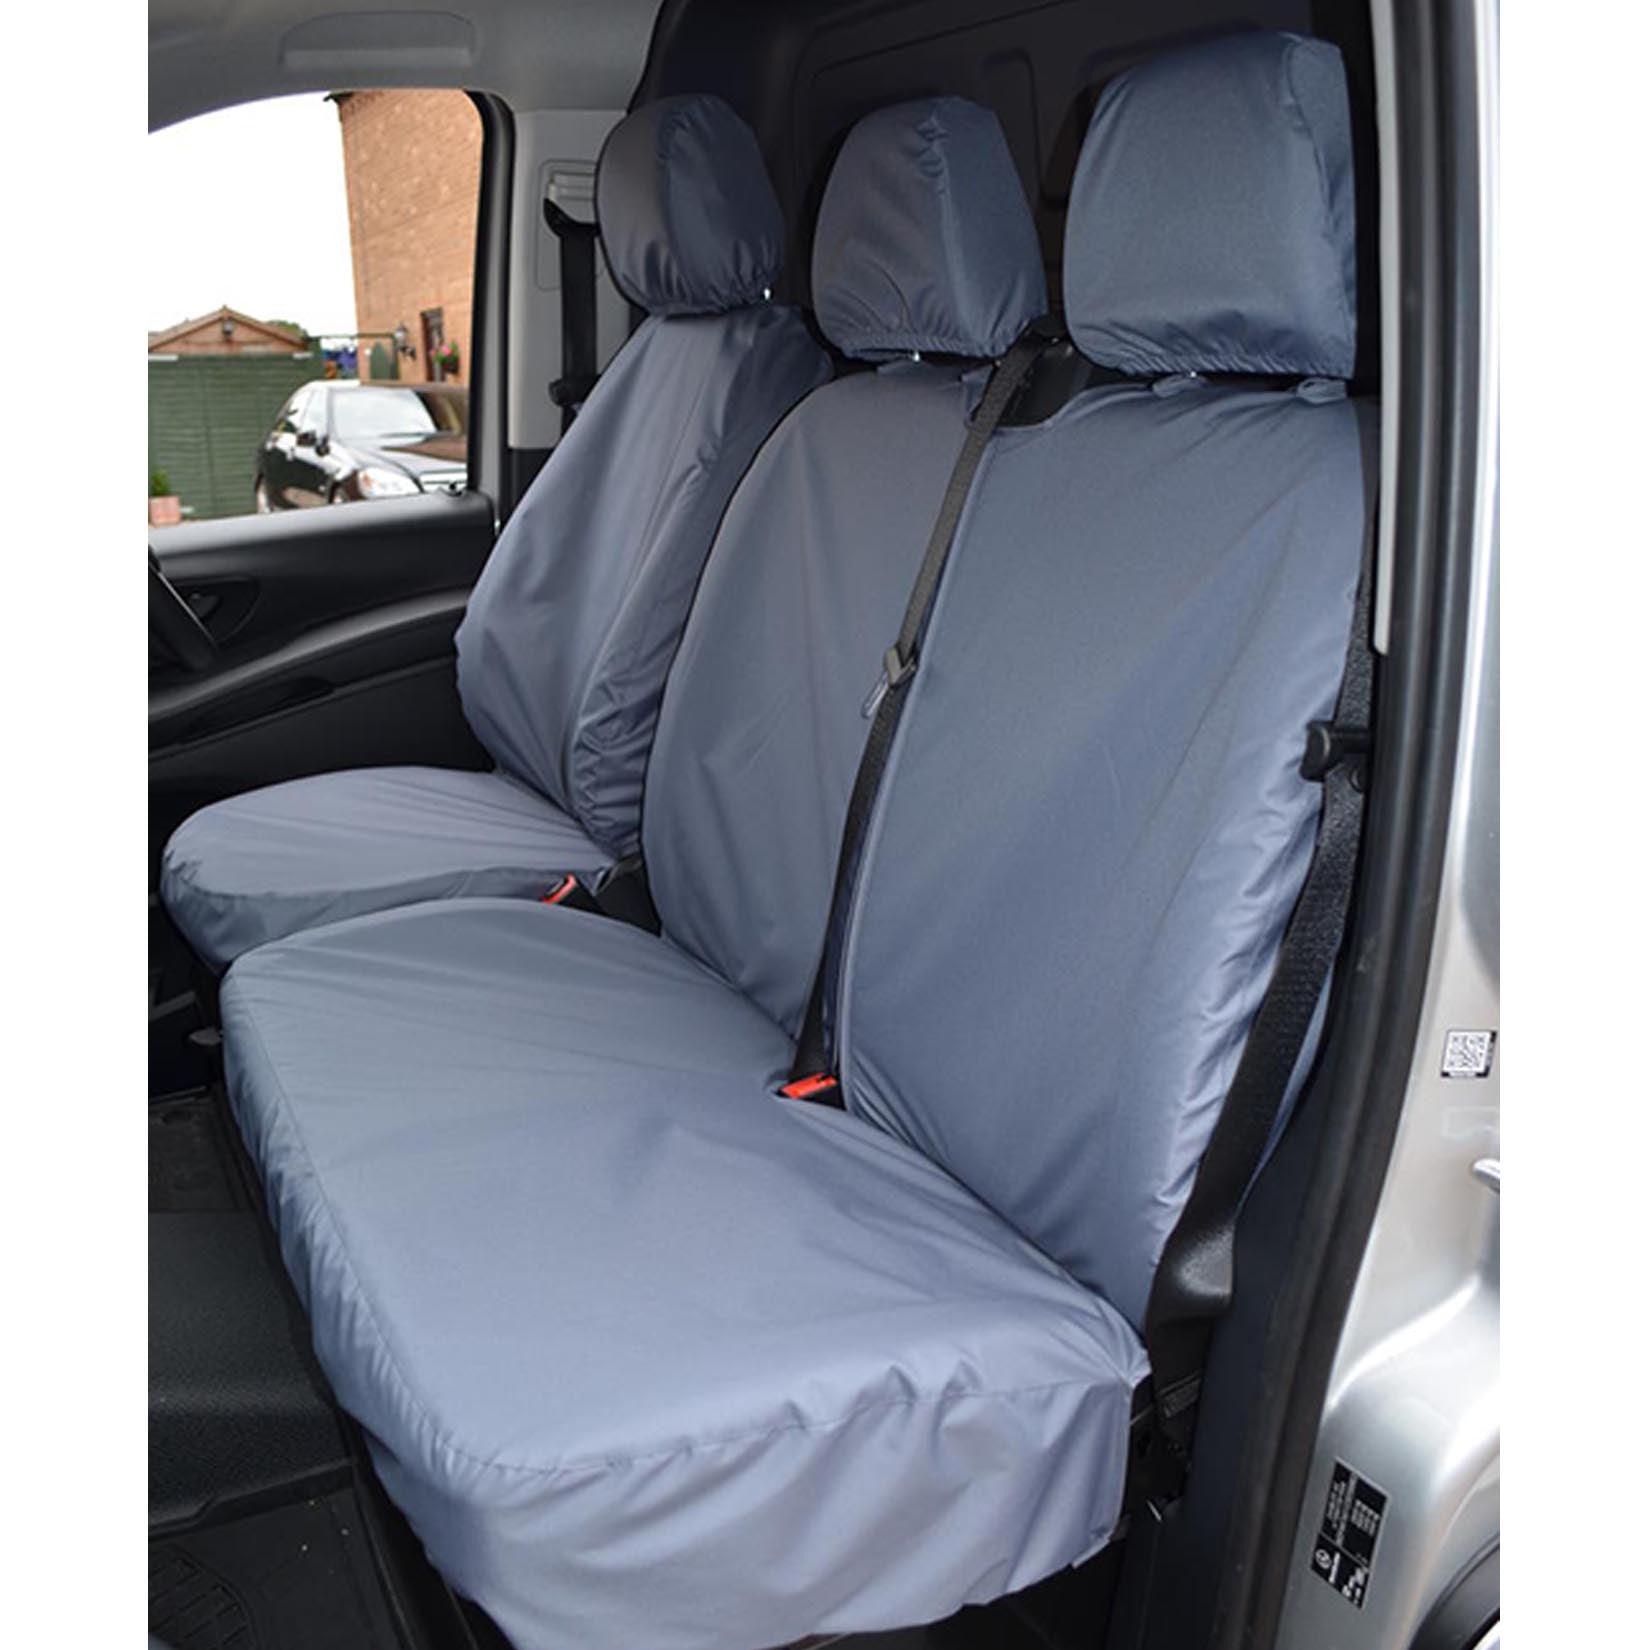 MERCEDES VITO 2015 ON FRONT TRIPLE TAILORED SEAT COVERS IN GREY - Storm Xccessories2